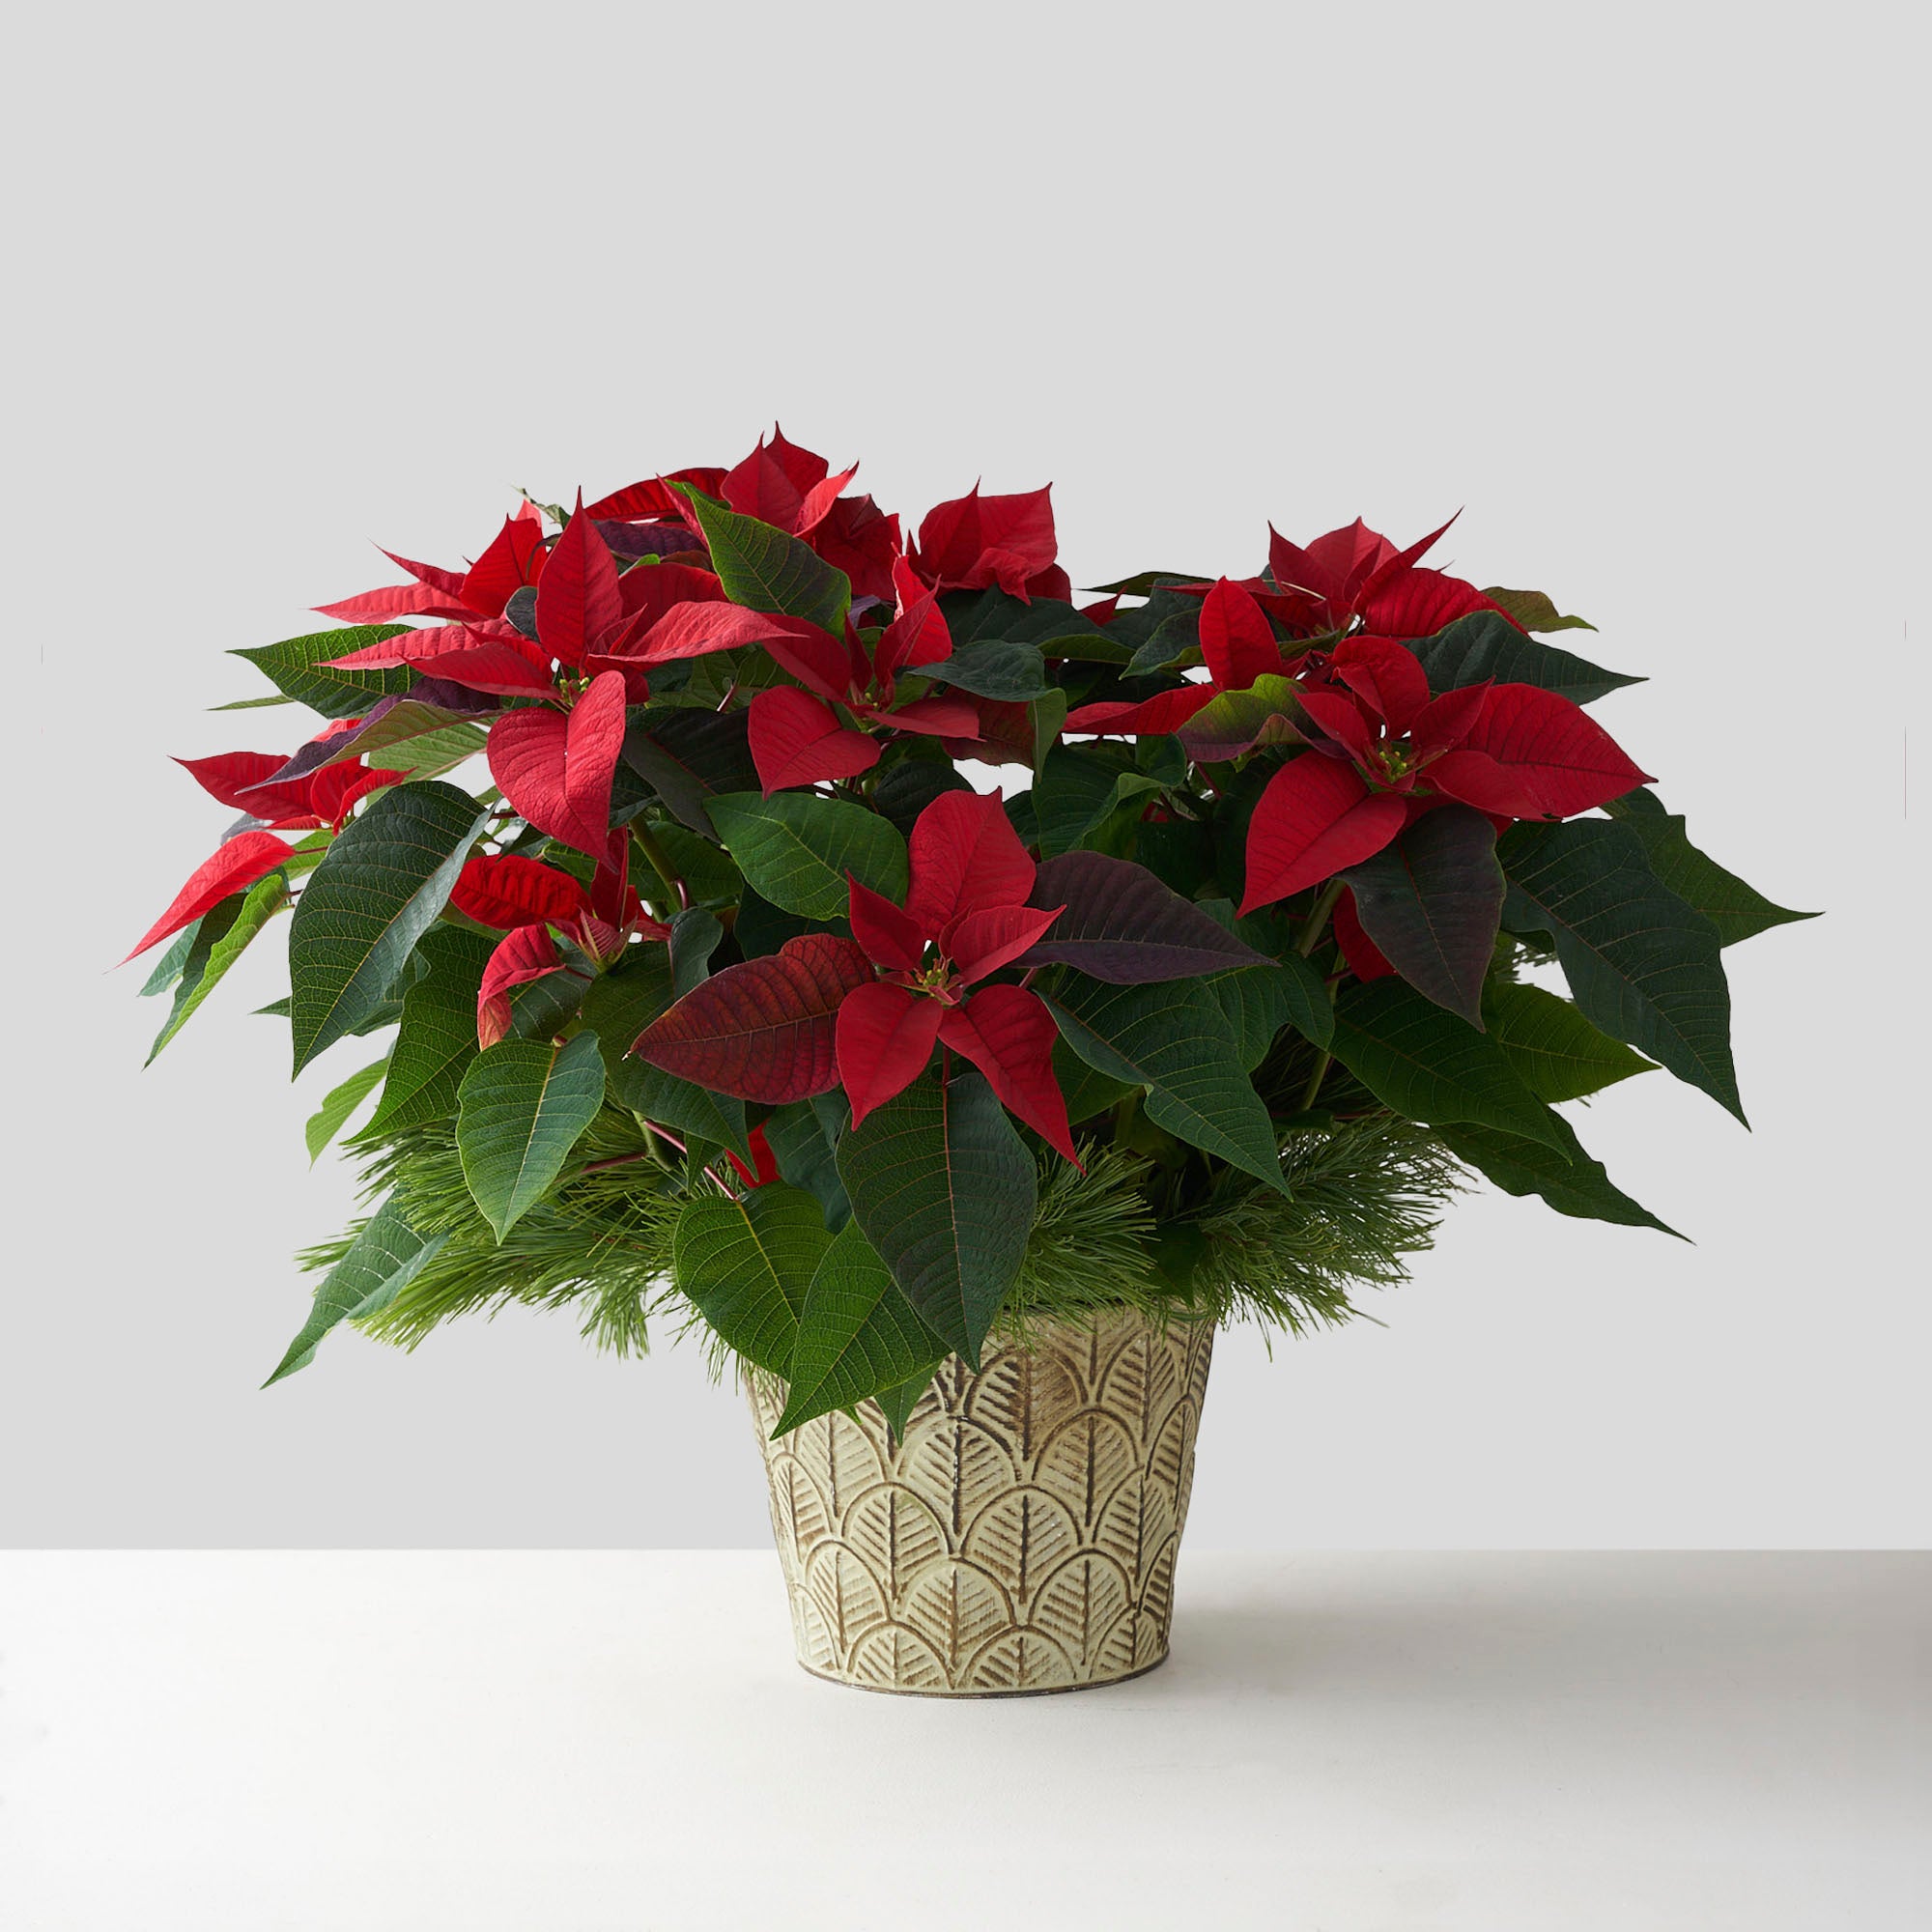 Red poinsettia in tin pot with pine boughs.